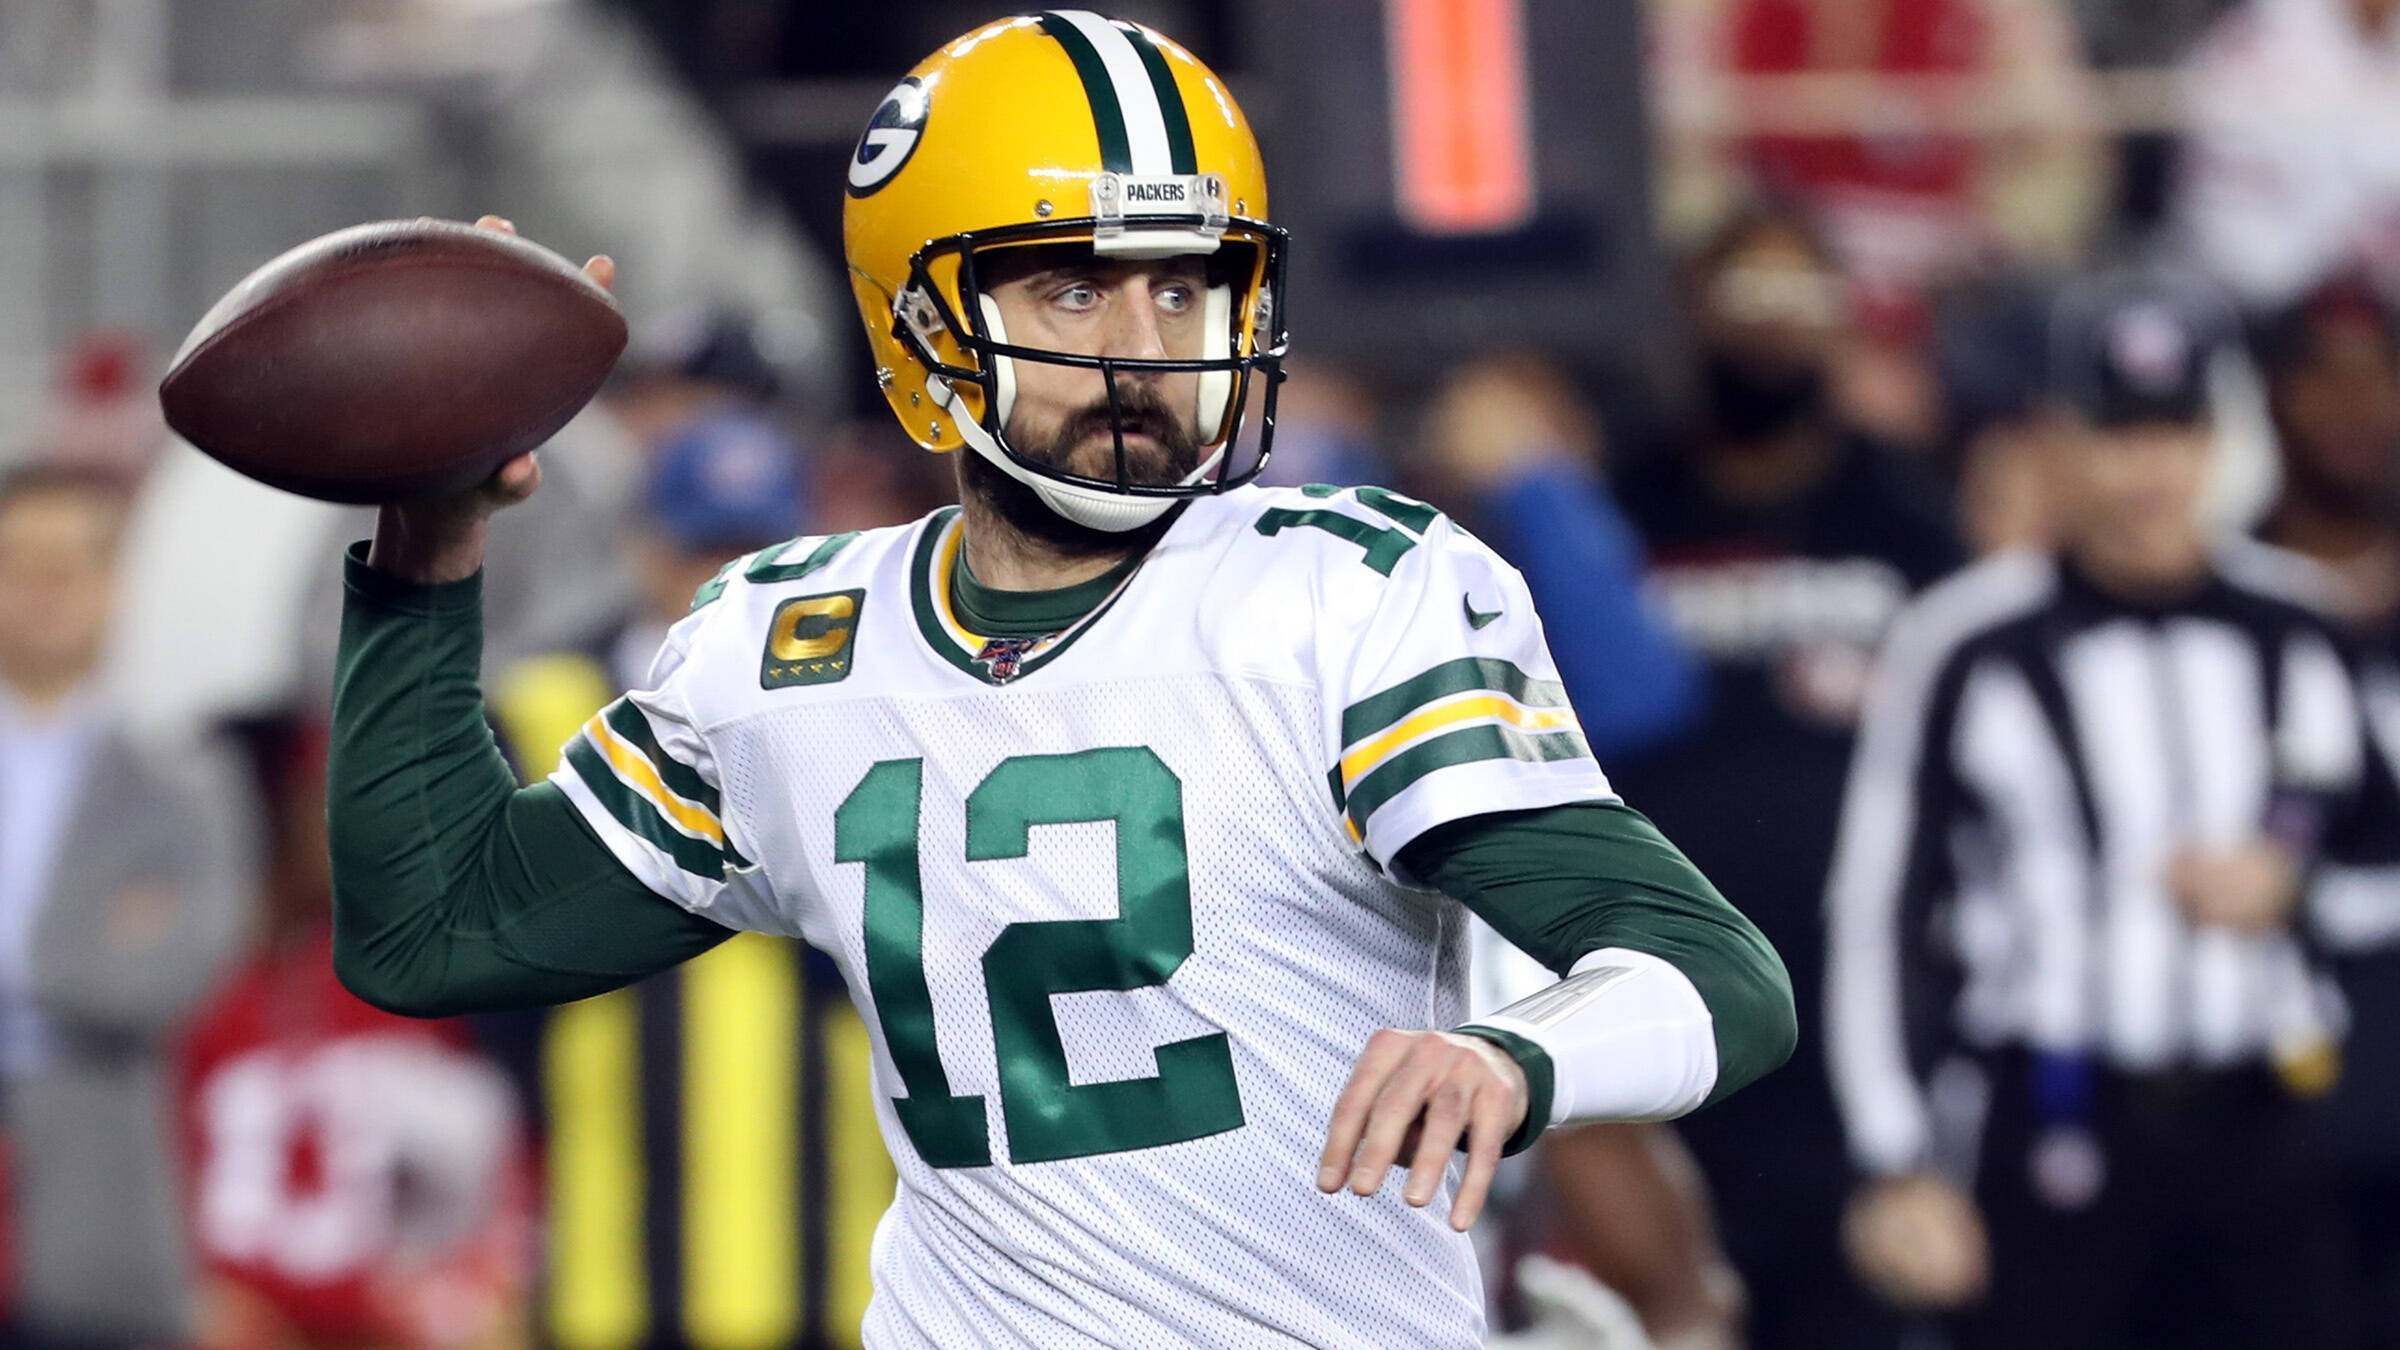 
                <strong>Platz 3: Aaron Rodgers - Green Bay Packers</strong><br>
                Overall Rating: 93
              